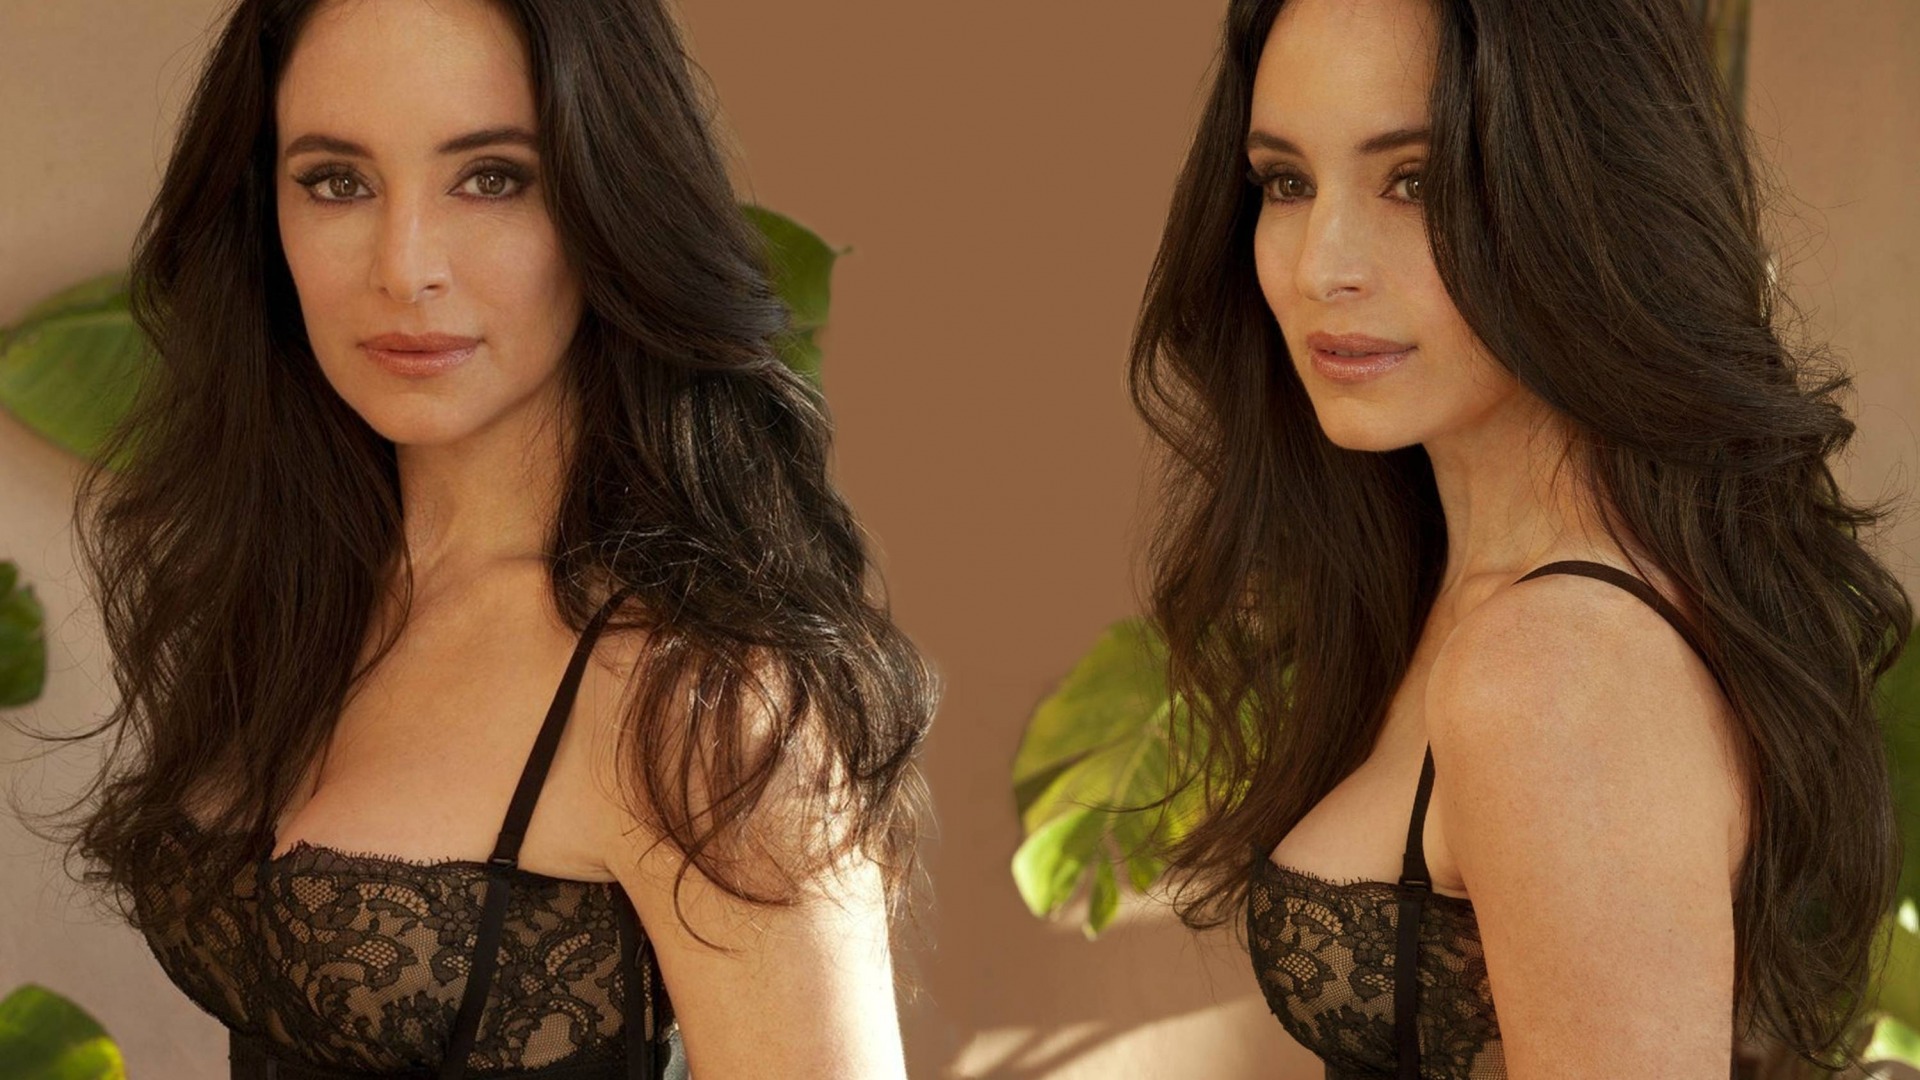 1920X1080 Madeleine Stowe Wallpaper Free HD Backgrounds Images Pictures. 